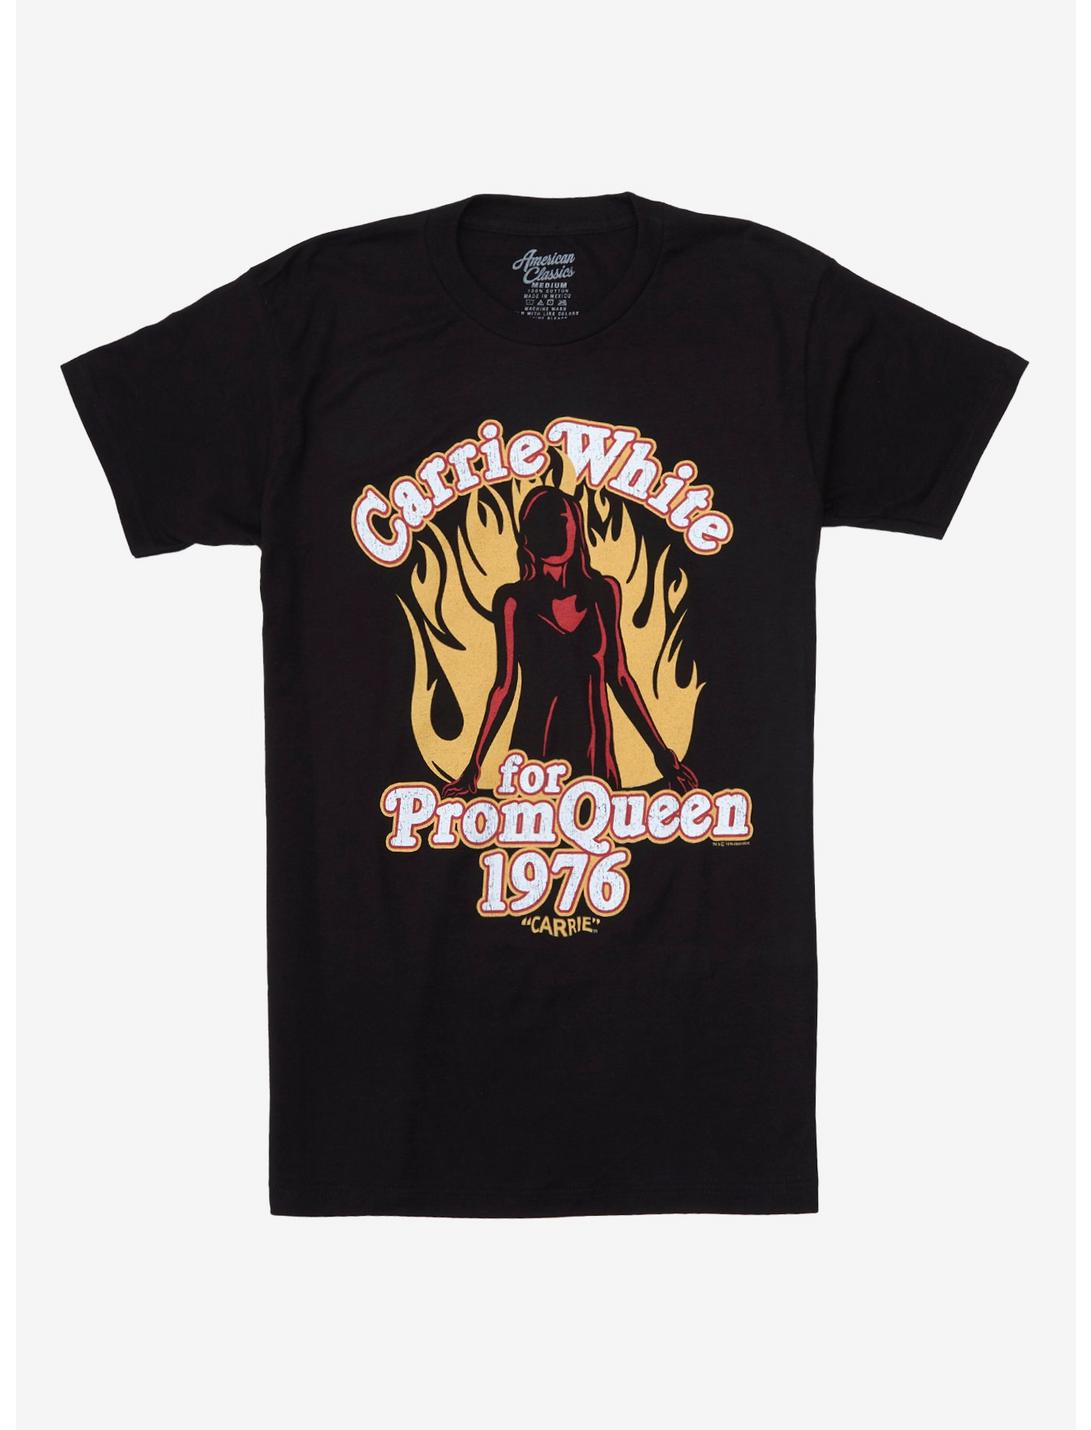 Carrie Prom Queen 1976 T-Shirt, MULTI, hi-res